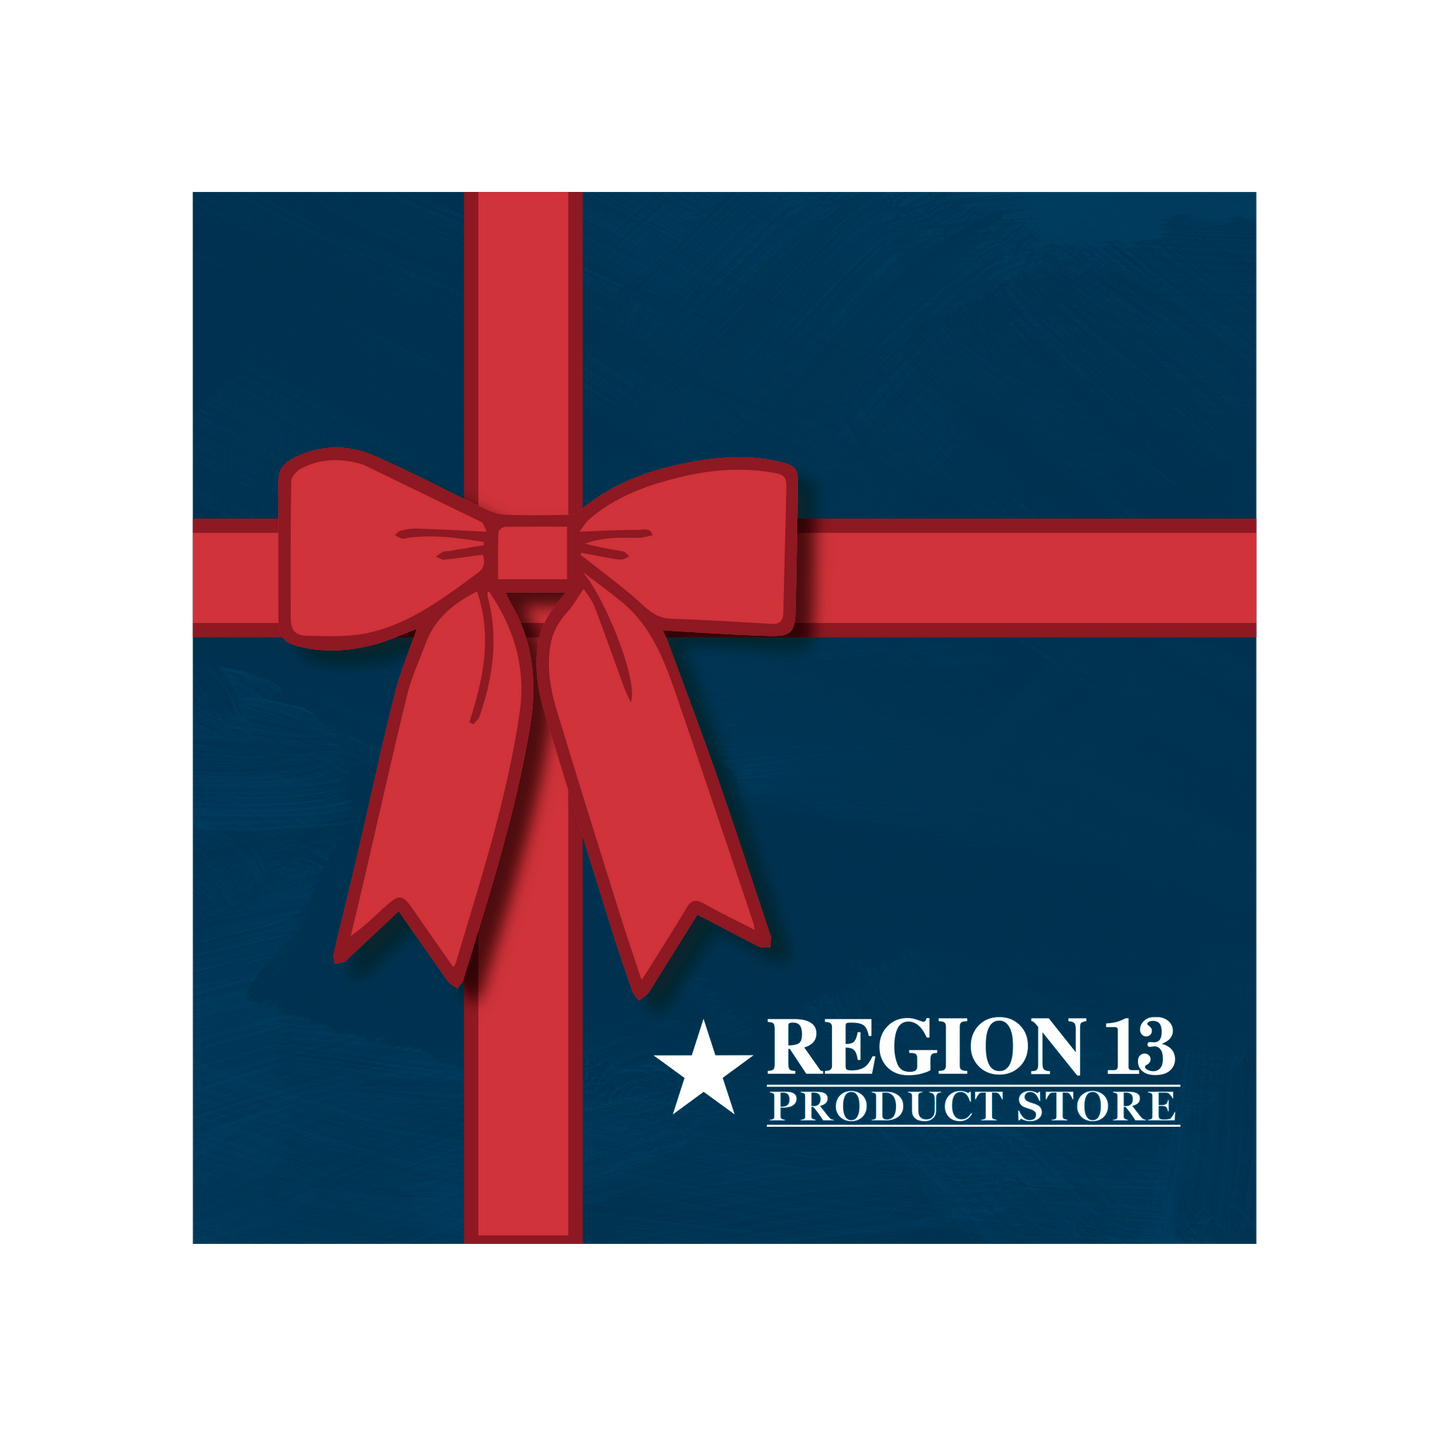 Blue square with a red bow and the Region 13 Product Store logo